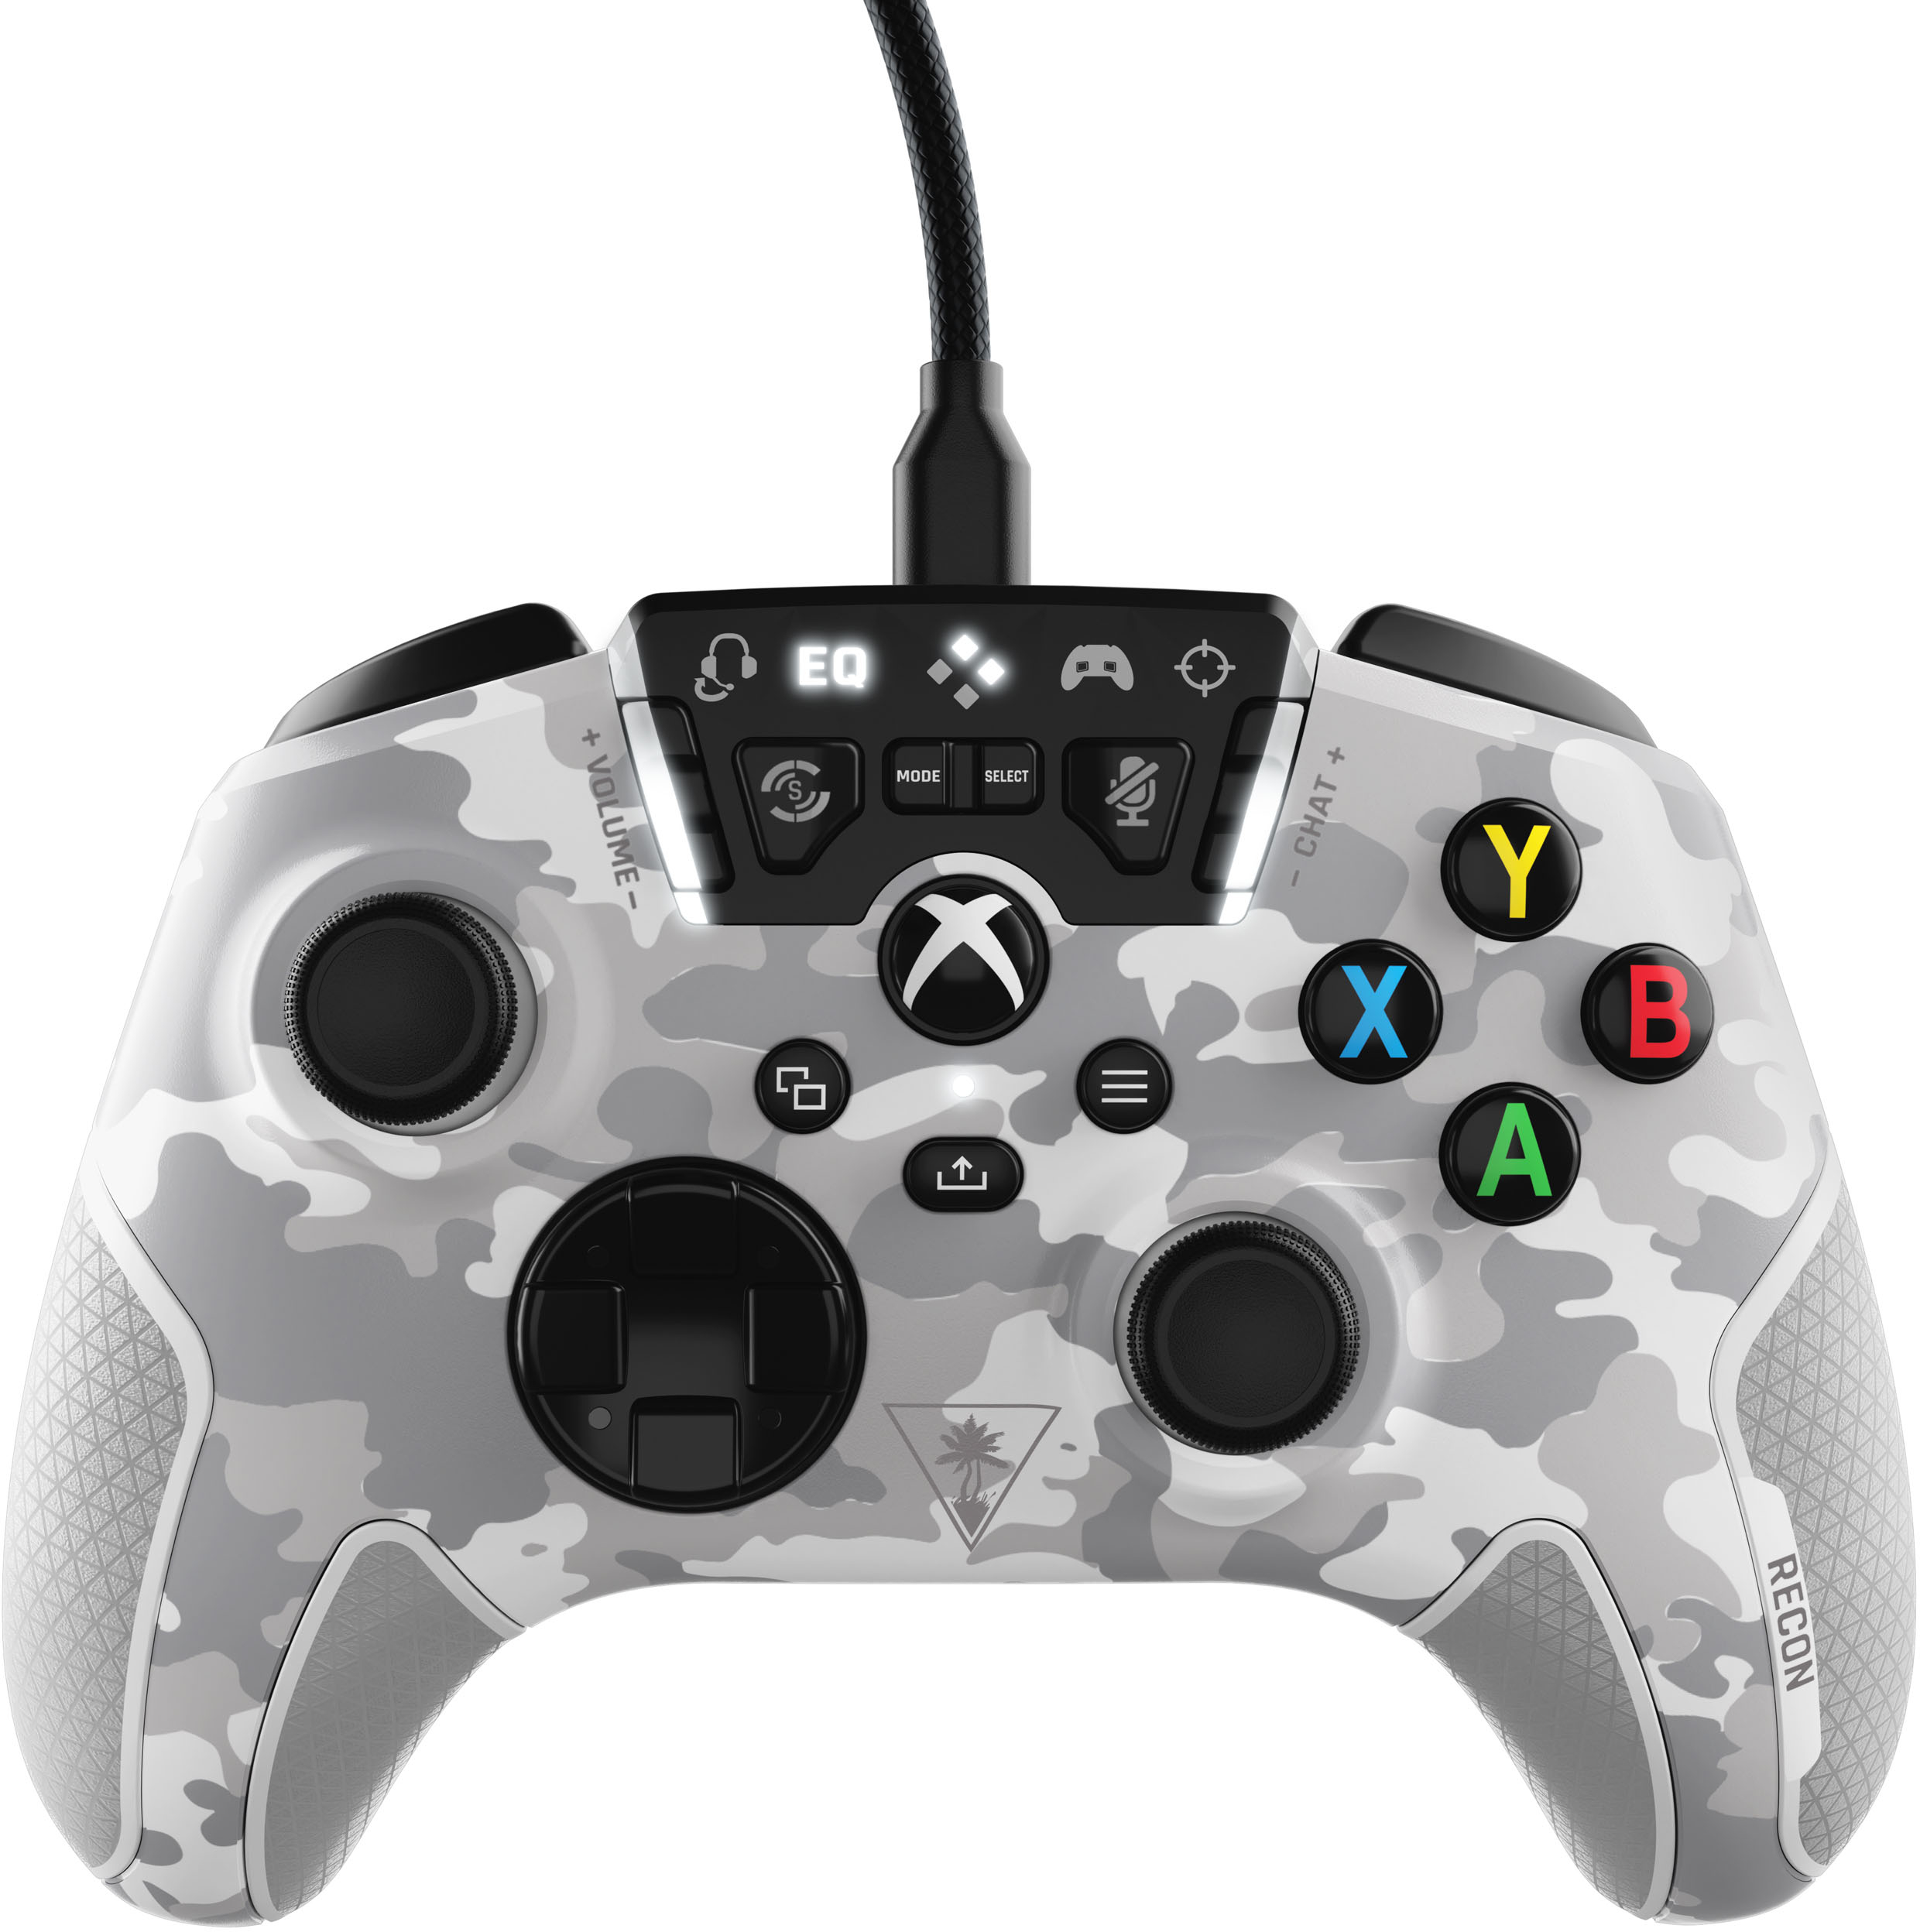 Remappable - Series Xbox Buy Controller Buttons PCs Xbox Arctic Best X, with Windows Turtle Camo for S, Series Wired Xbox TBS-0707-01 Recon One Controller & Beach